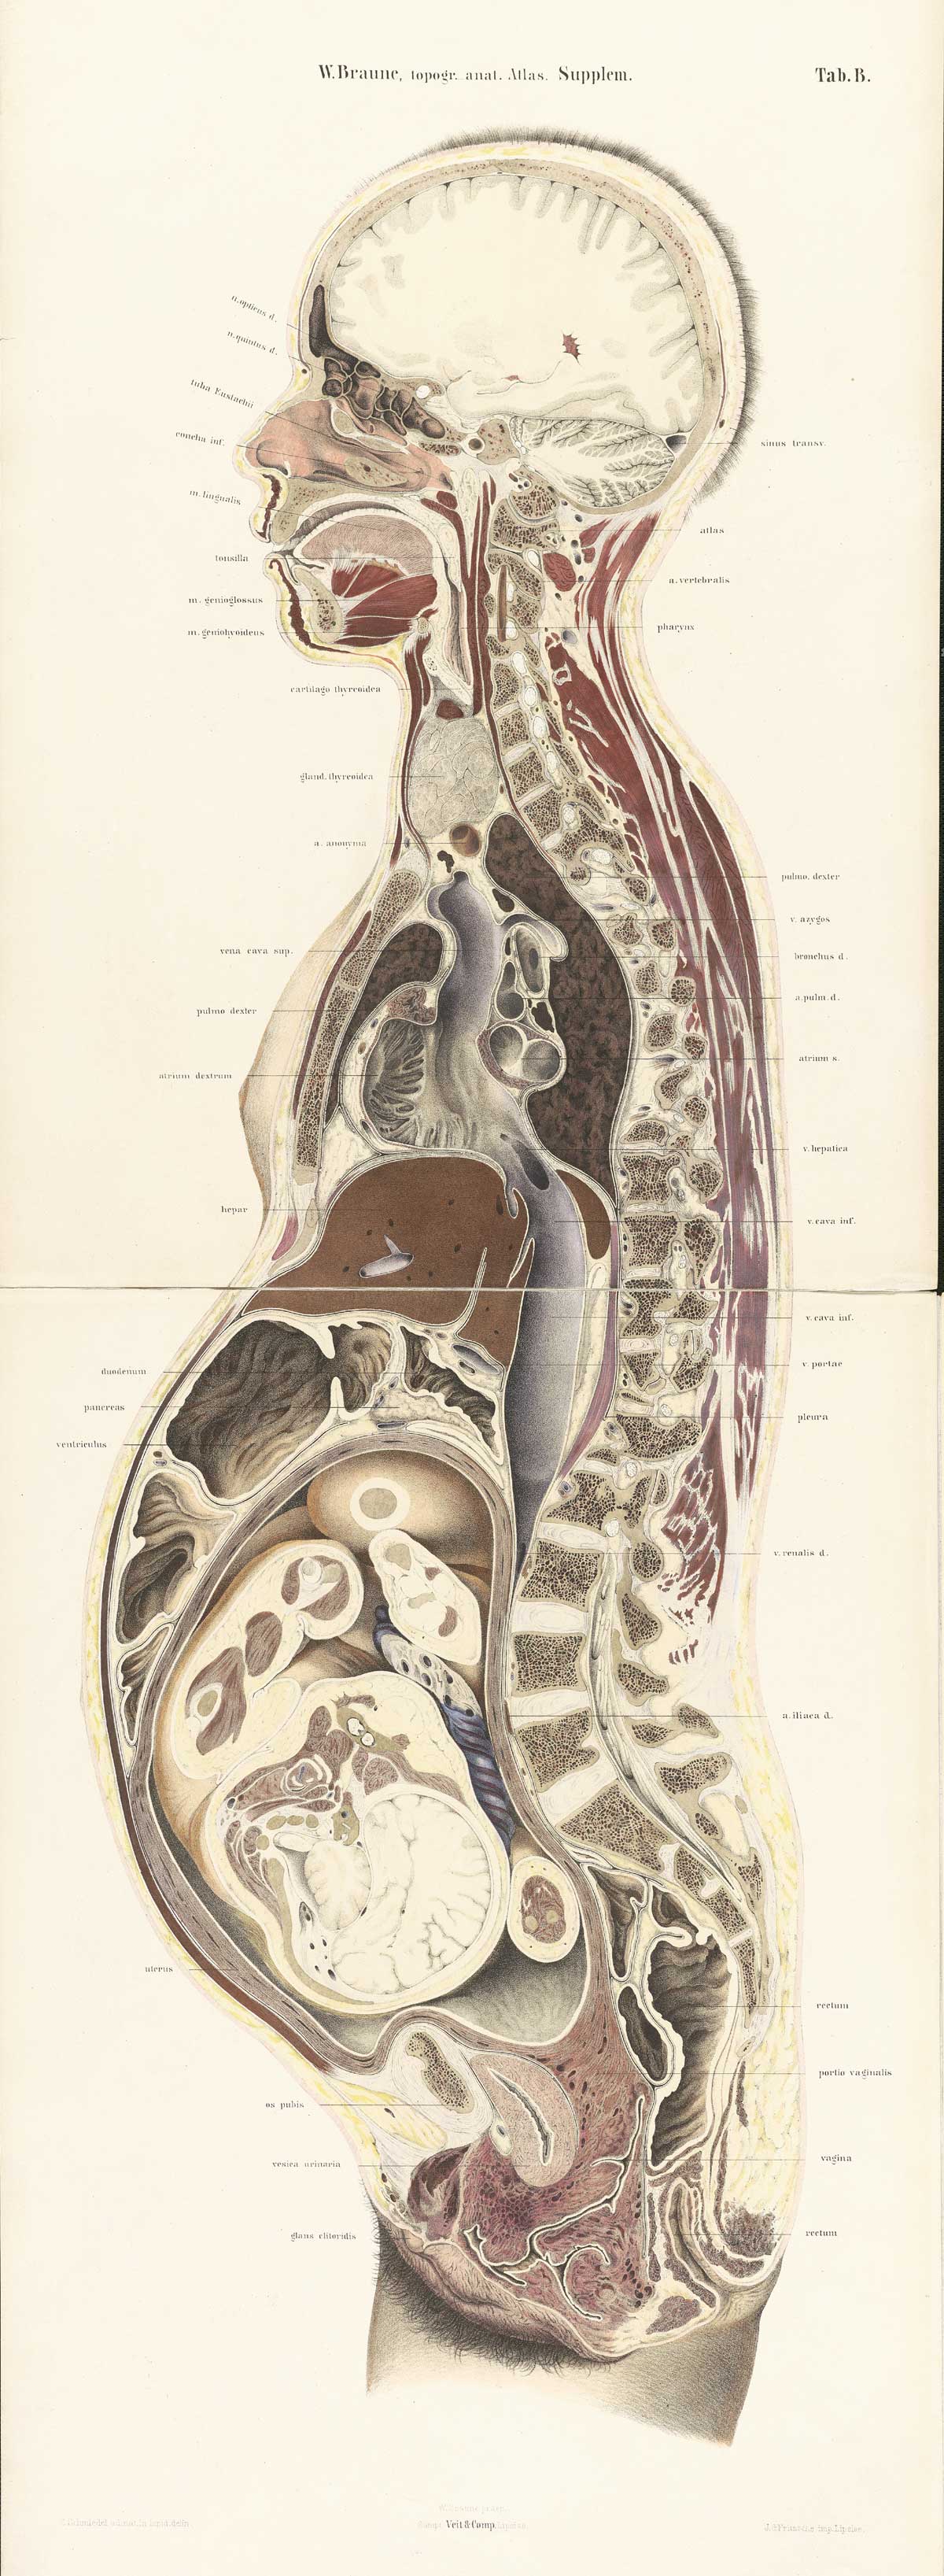 Chromolithograph of pregnant female body cross-section with the subject facing to the left, showing all structures and internal organs of the head, thorax, and abdomen, including fetus in womb nearly to term also in cross section, from Wilhelm Braune’s Die Lage des Uterus und Foetus Ende der Schwangerschaft, nach durchschnitten an Gefrornen Cadavern, Leipzig, 1872.